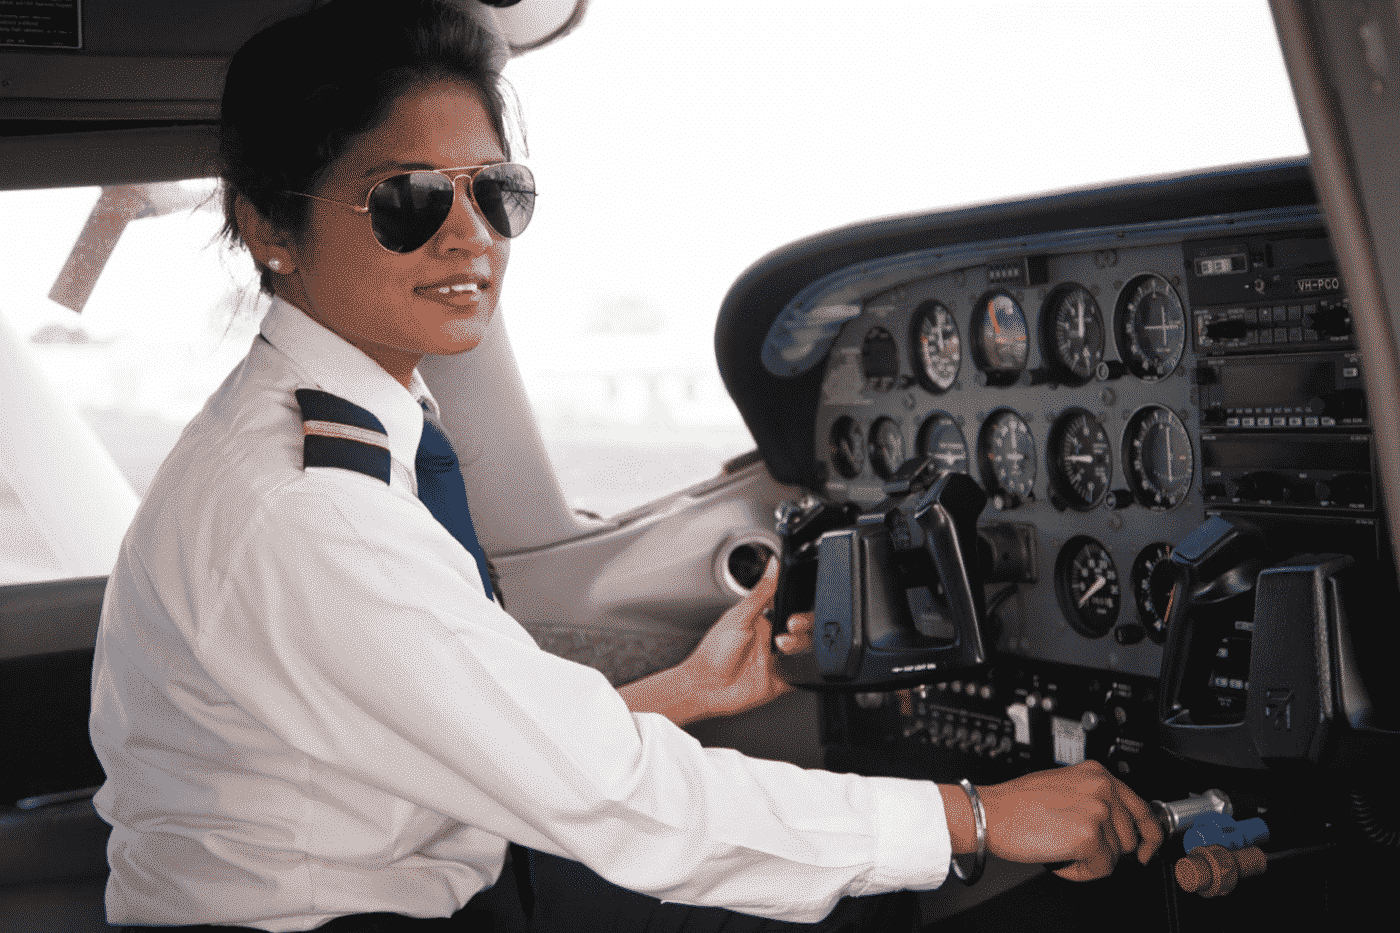 How to get a job as a commercial airline pilot